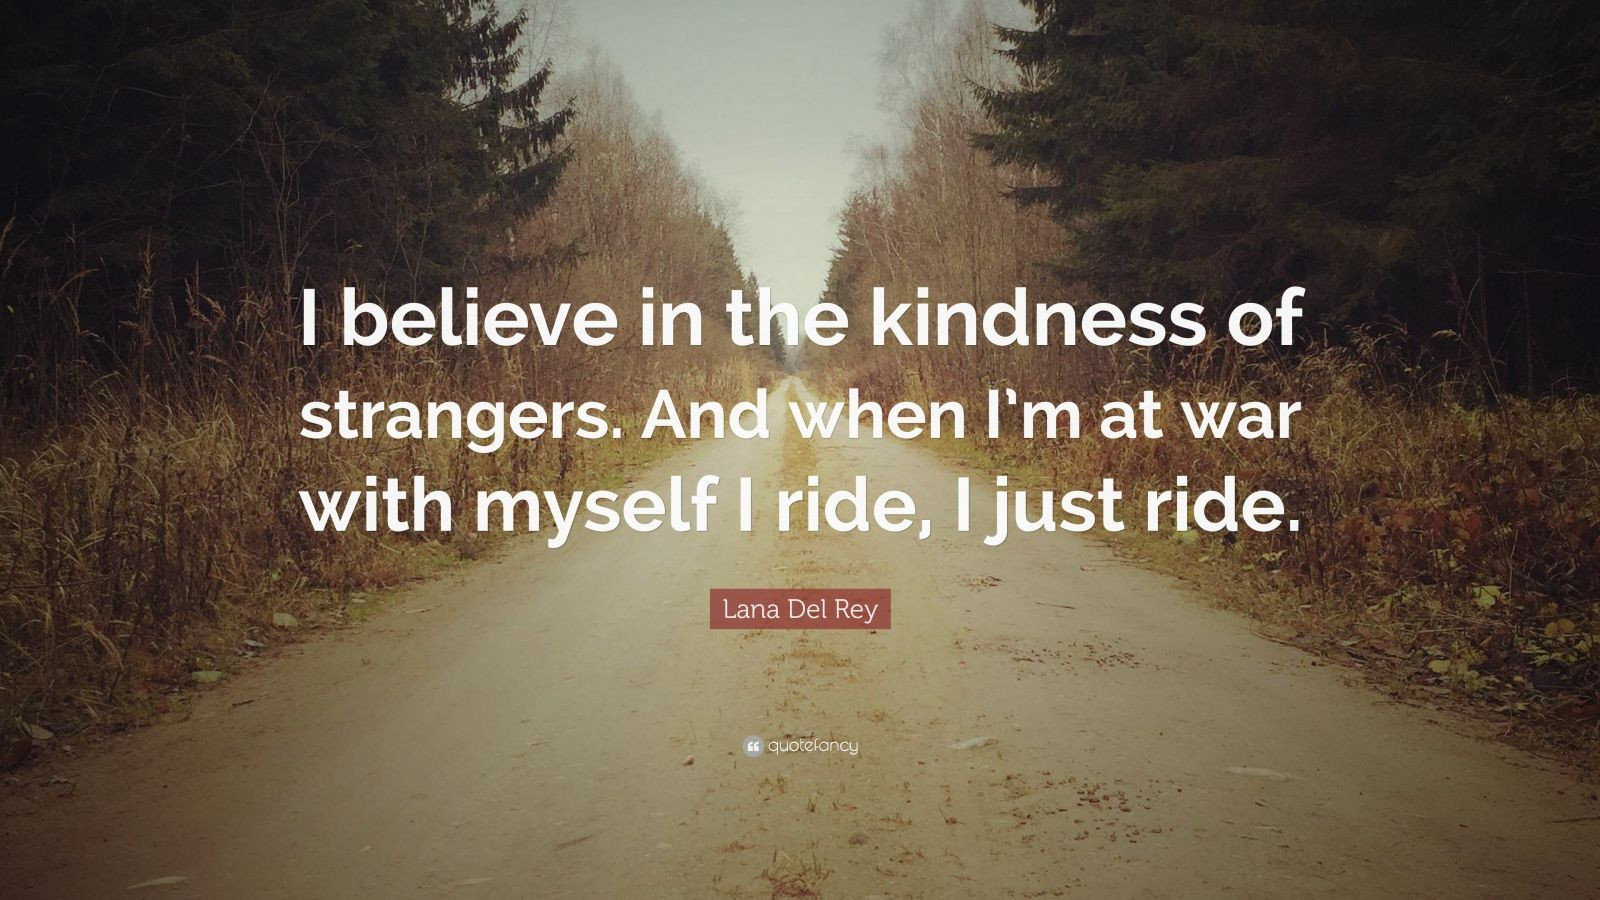 The Kindness Of Strangers Quote
 Lana Del Rey Quote “I believe in the kindness of